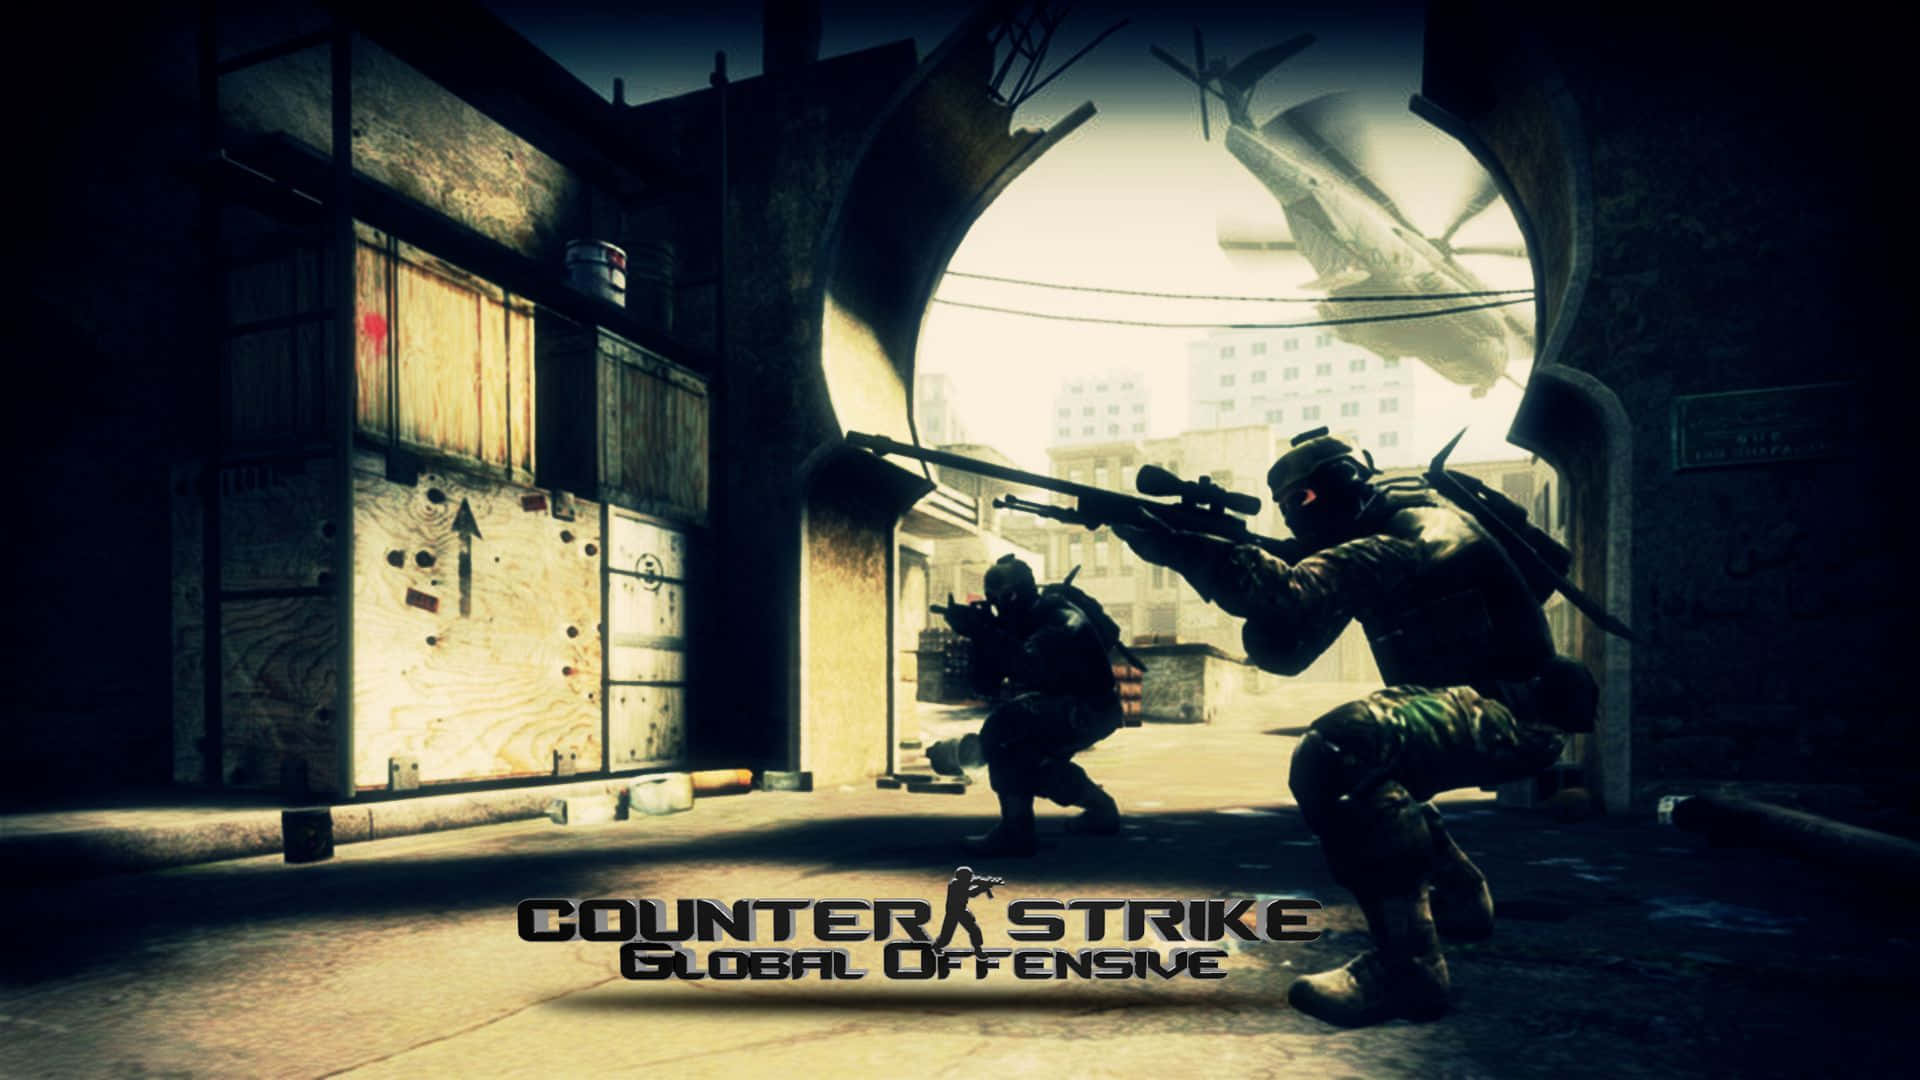 Pro gamer competing in Counter-Strike: Global Offensive